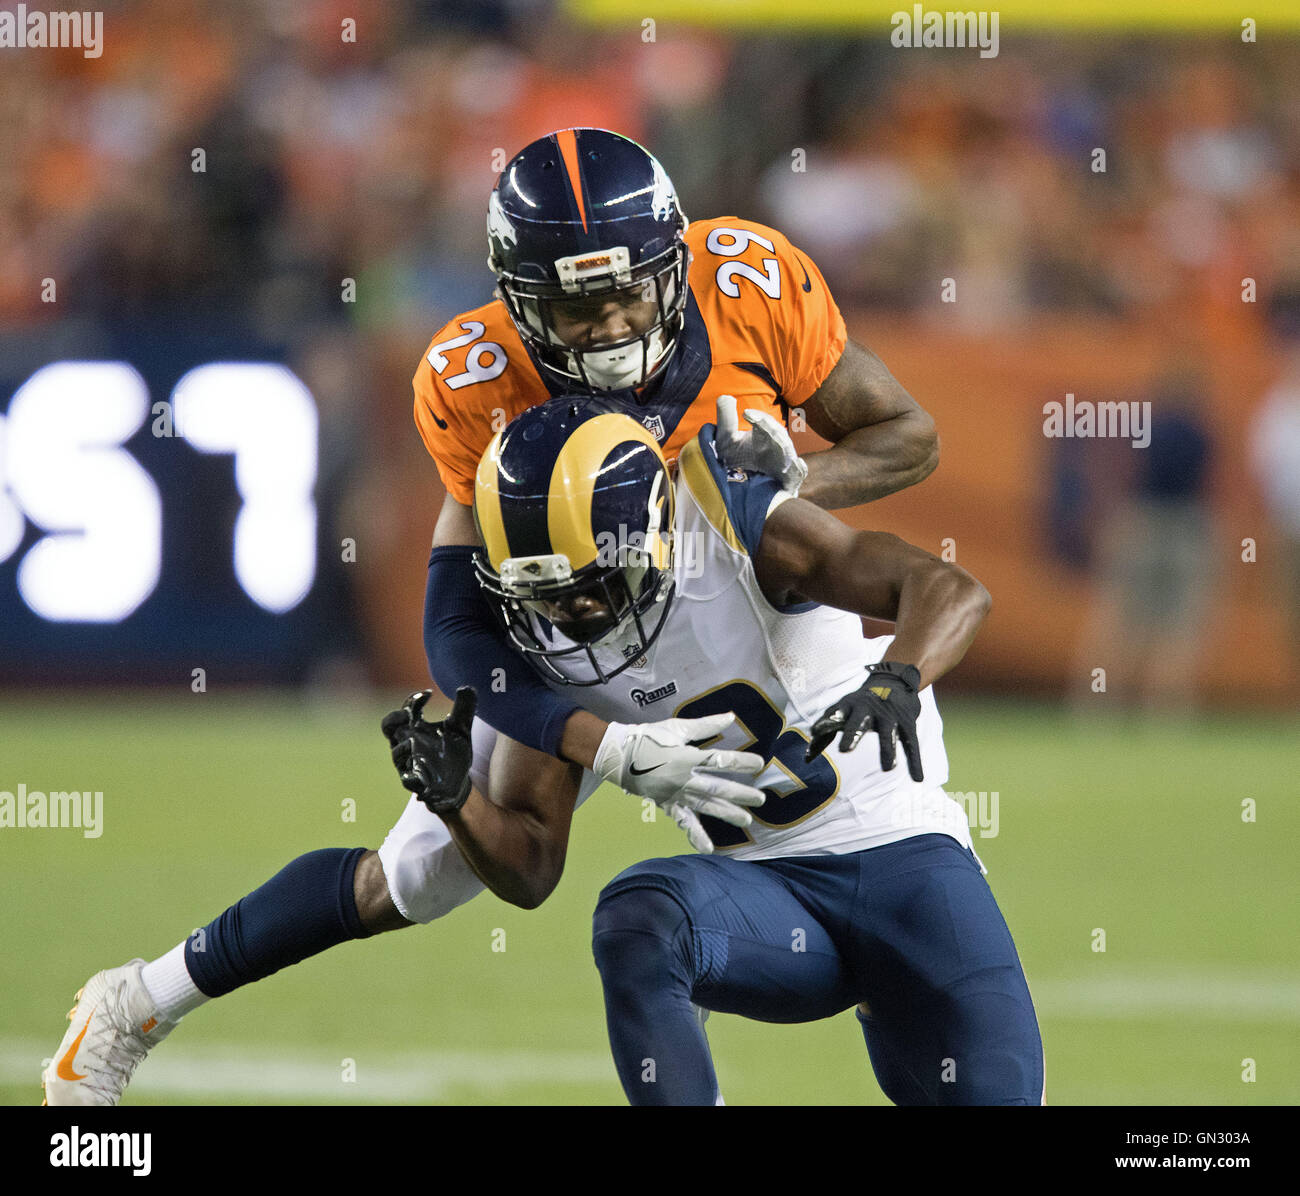 Denver, Colorado, USA. 27th Aug, 2016. Broncos CB BRADLEY ROBY, top, breaks up a pass to Rams WR MICHAEL THOMAS, below, during the 1st. Half at Sports Authority Field at Mile High Saturday night. The Broncos beat the Rams 17-9. © Hector Acevedo/ZUMA Wire/Alamy Live News Stock Photo